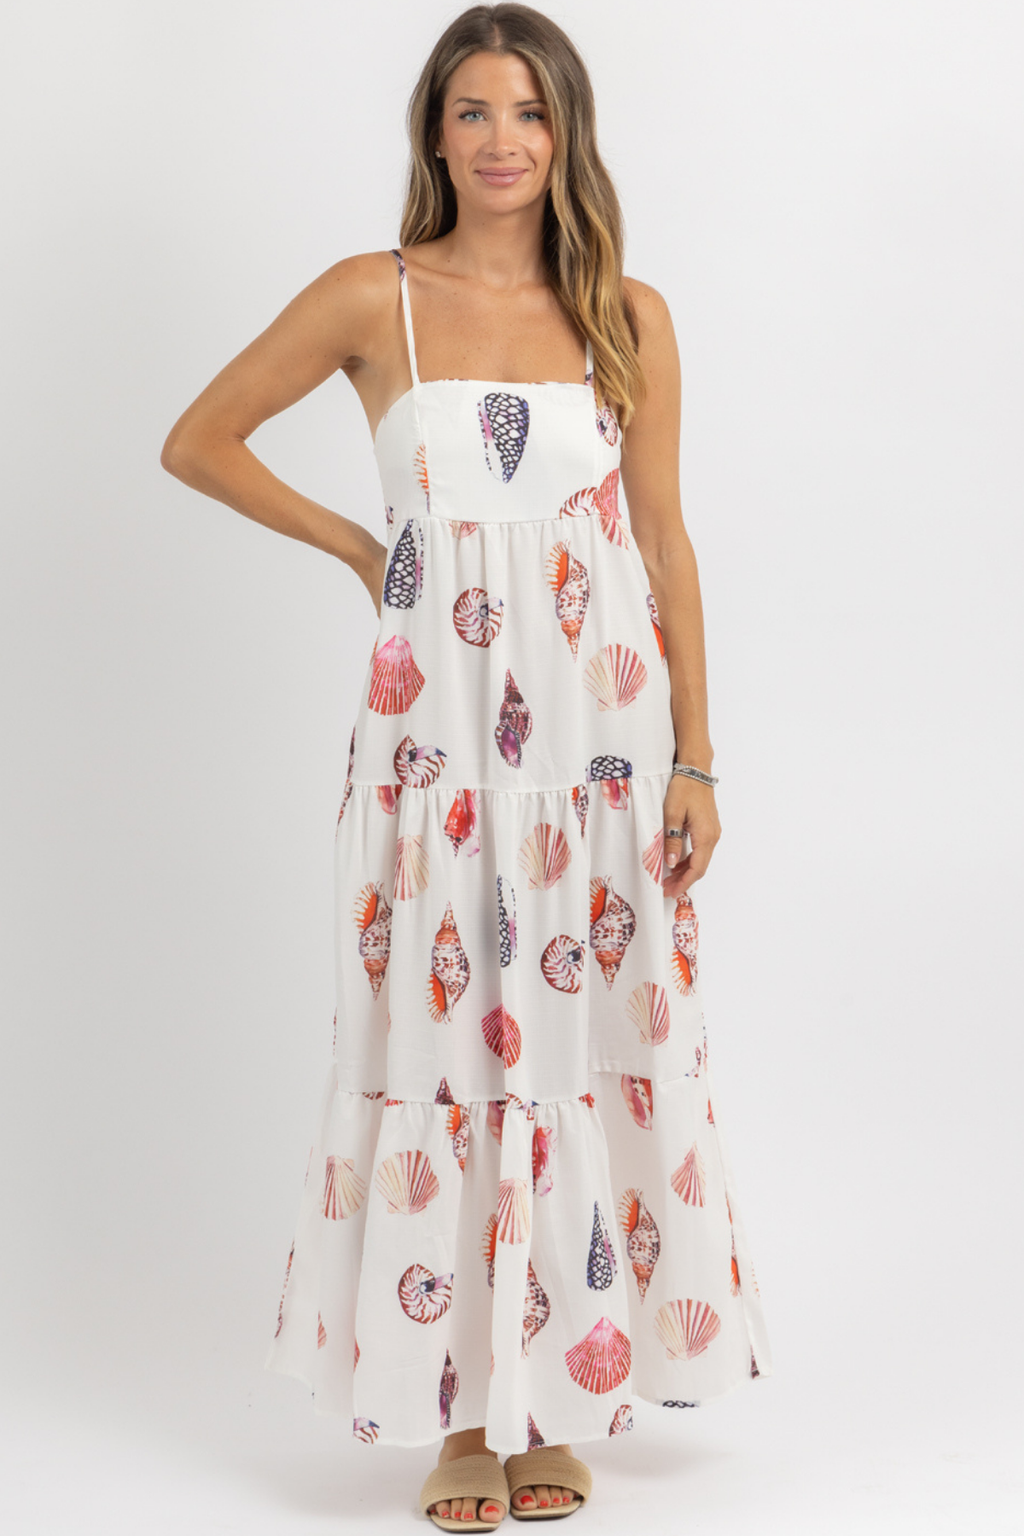 BY THE SEA TIERED MAXI DRESS